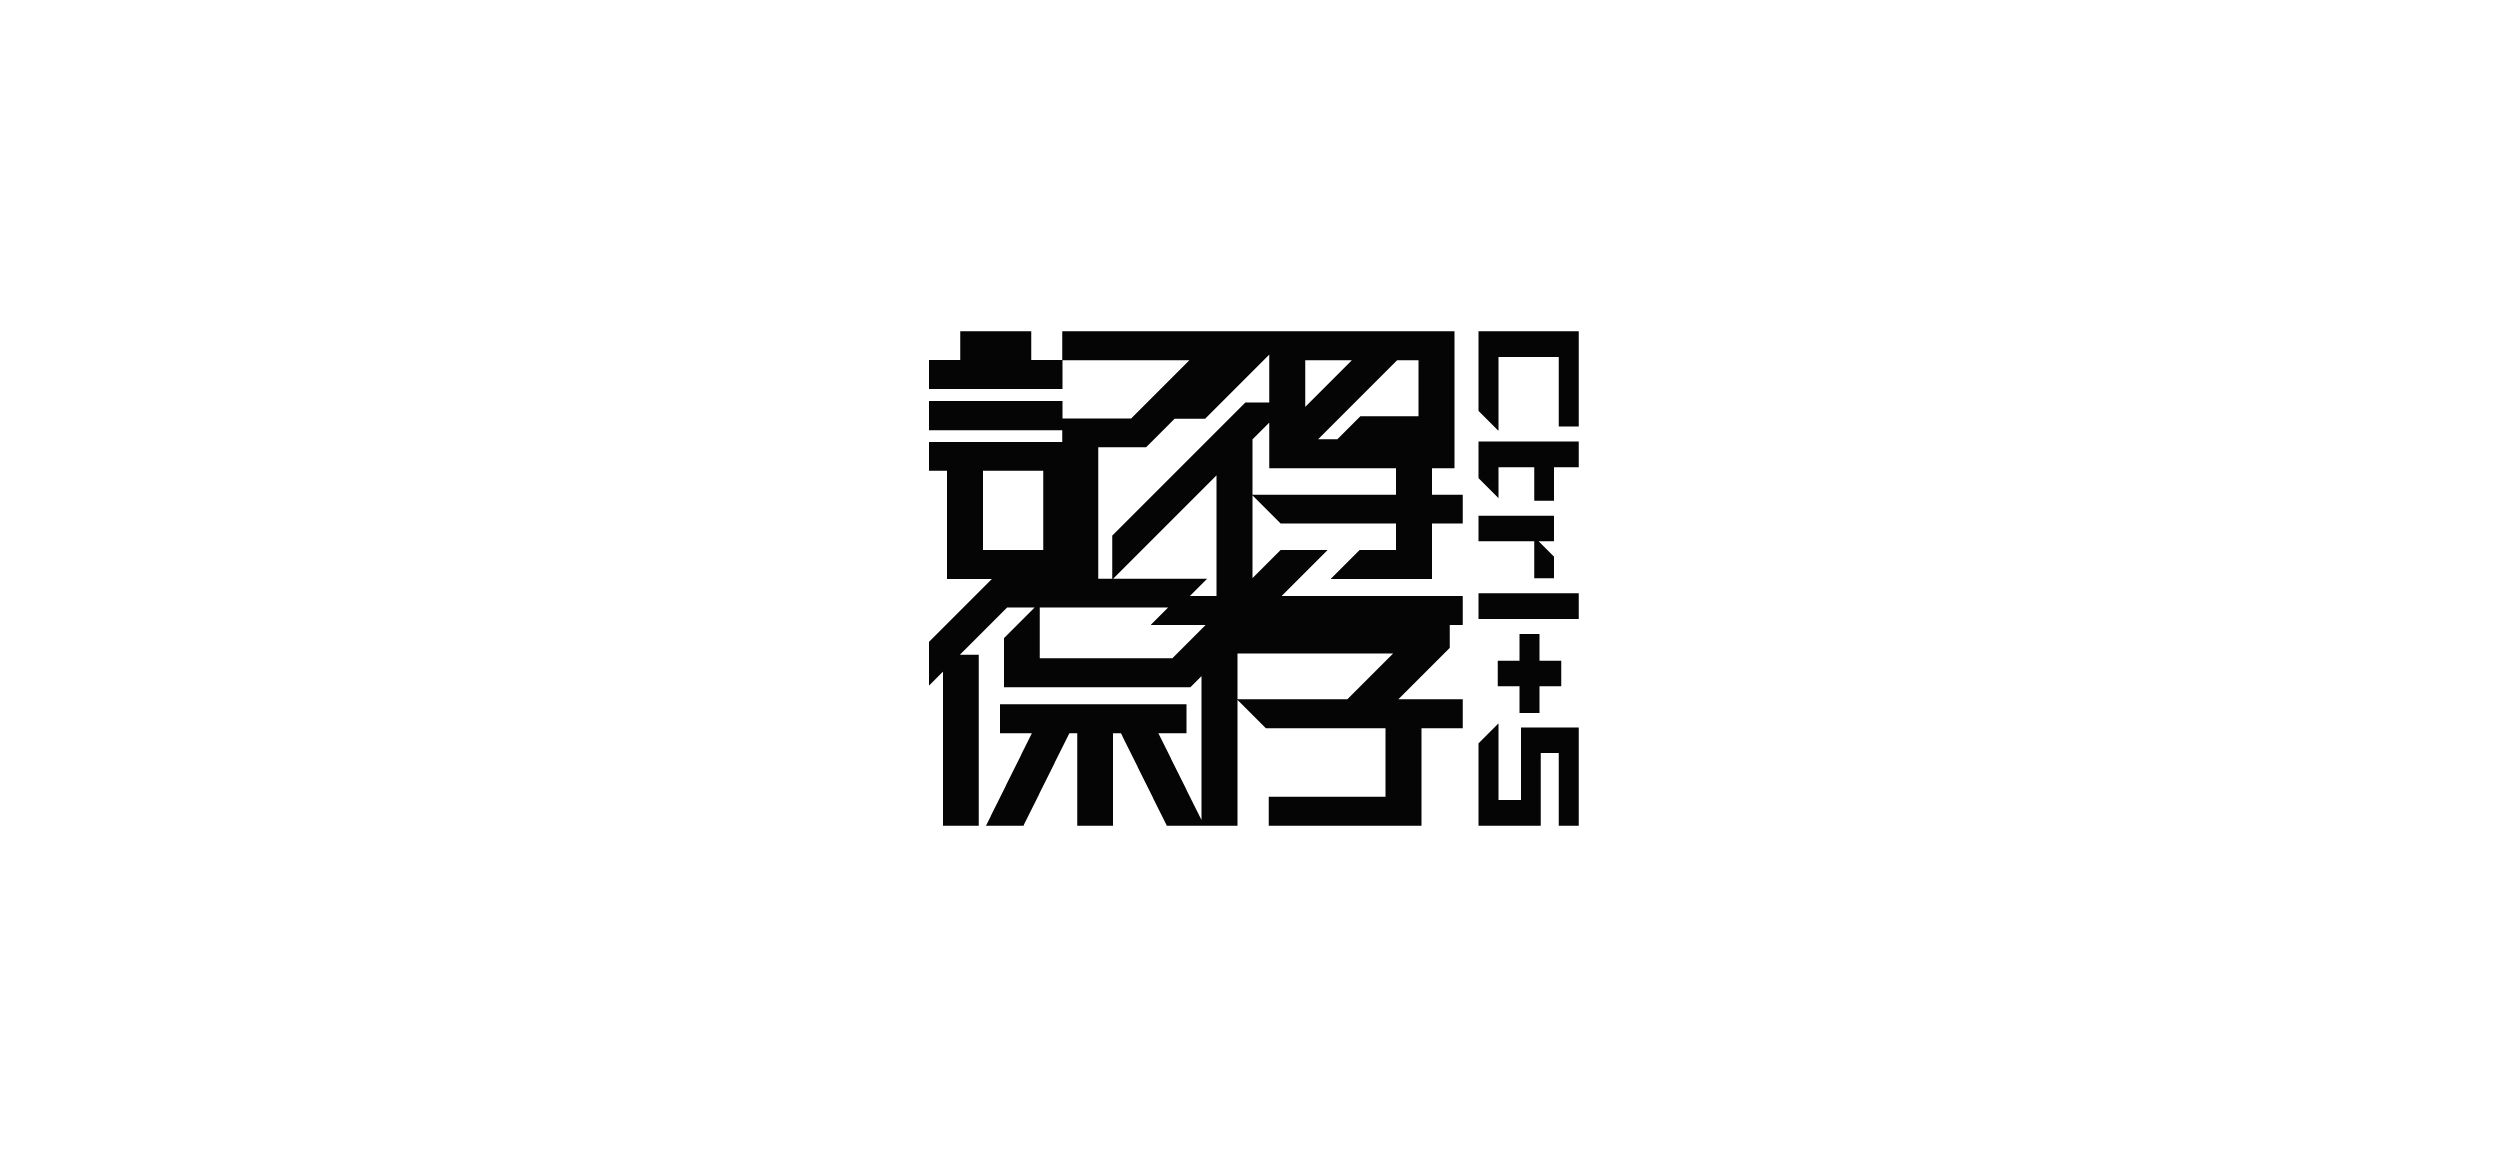 20P Collection of the latest Chinese font design schemes in 2021 #.323